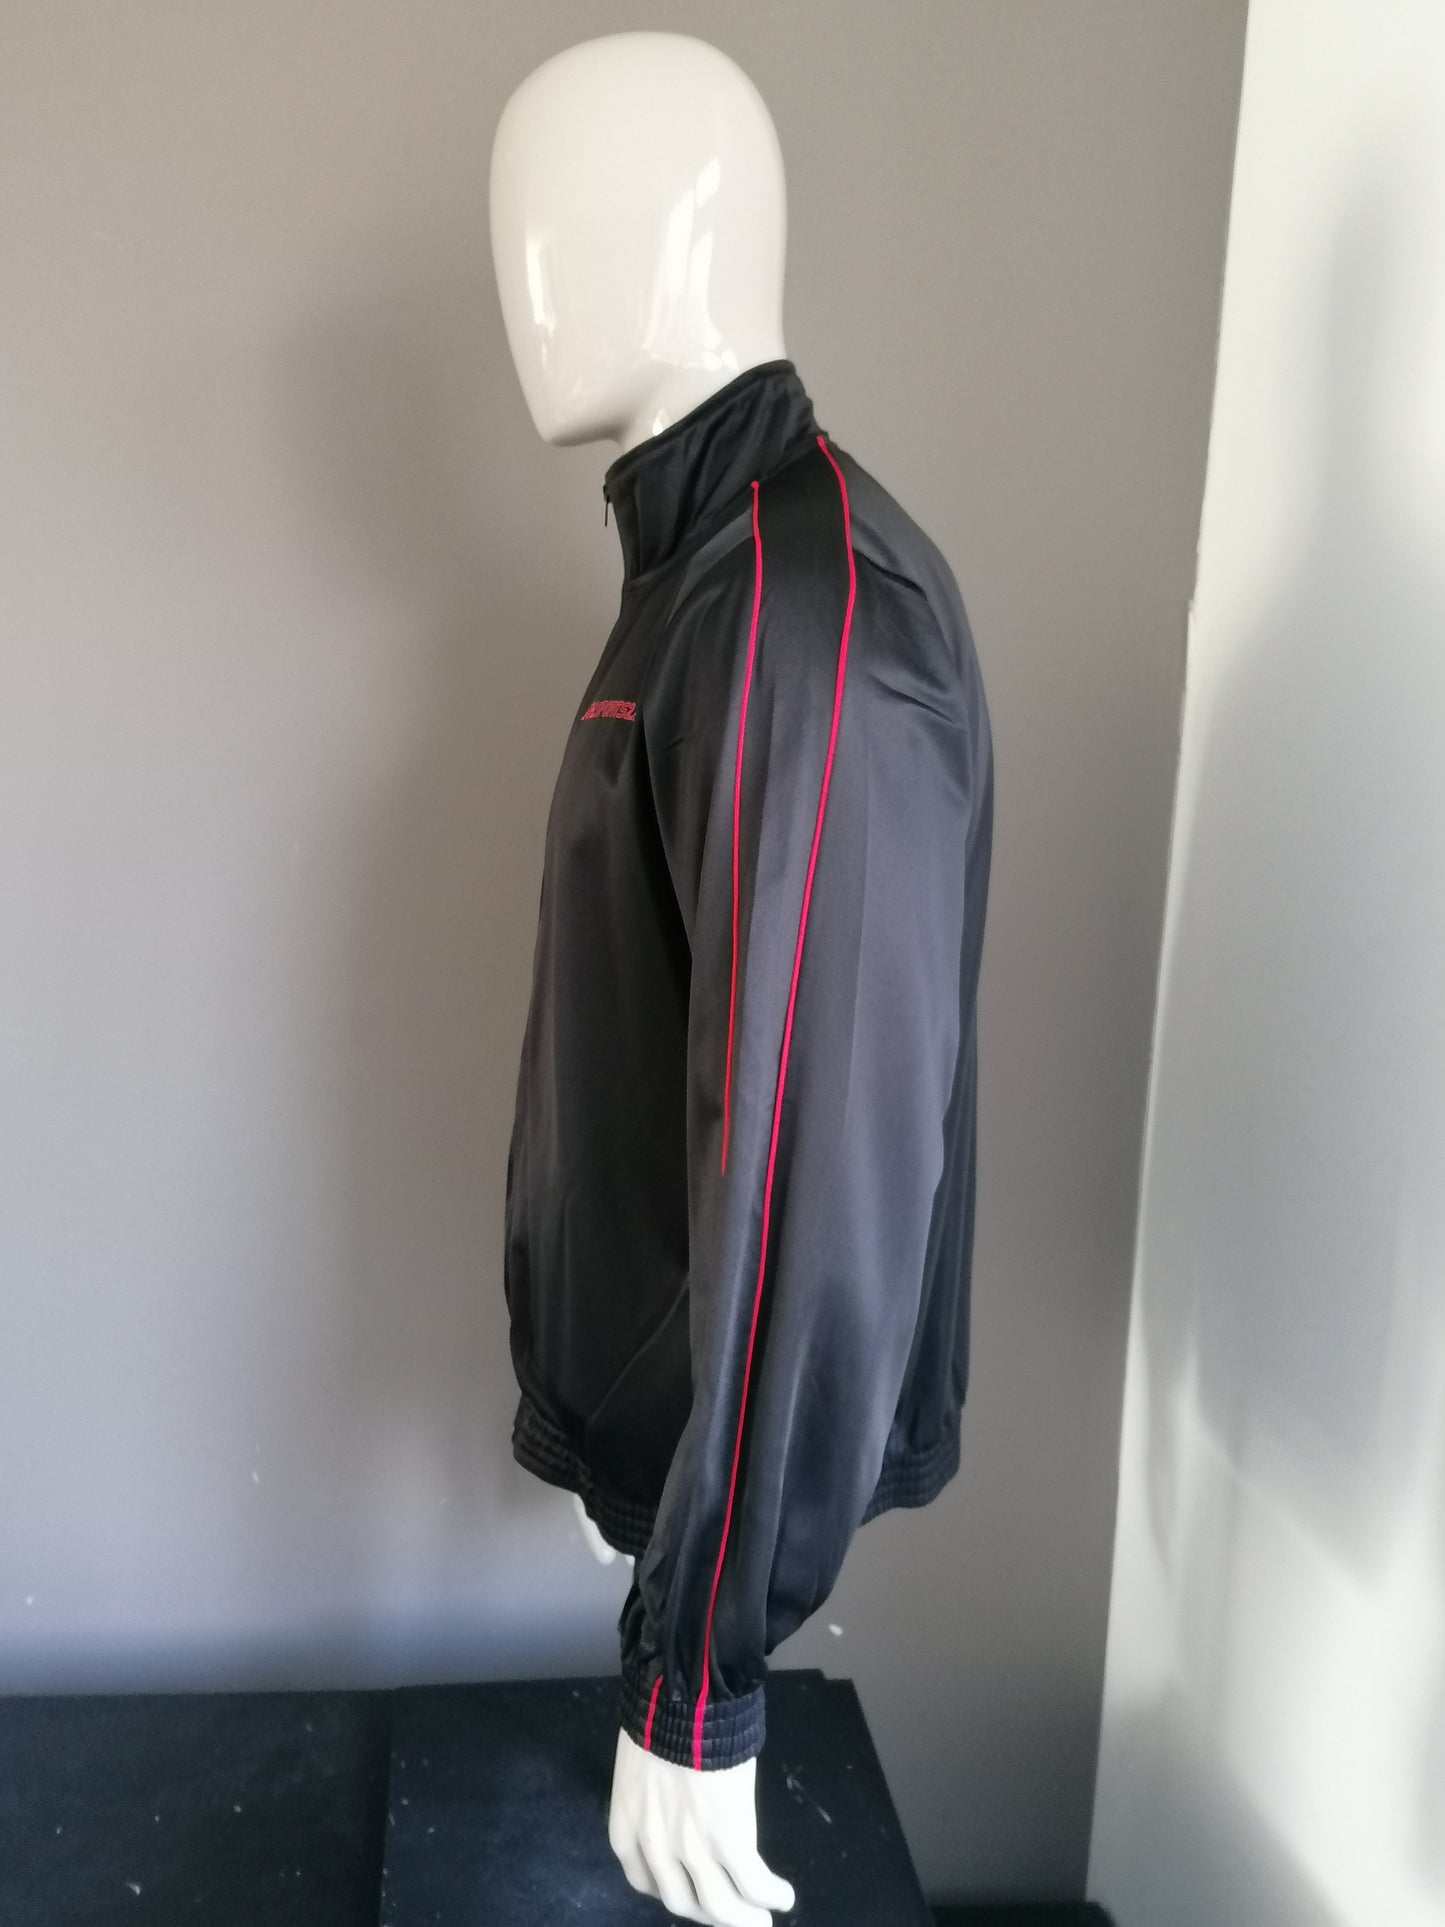 Upstairs Sport Training Jacket. Black red colored. Size L.